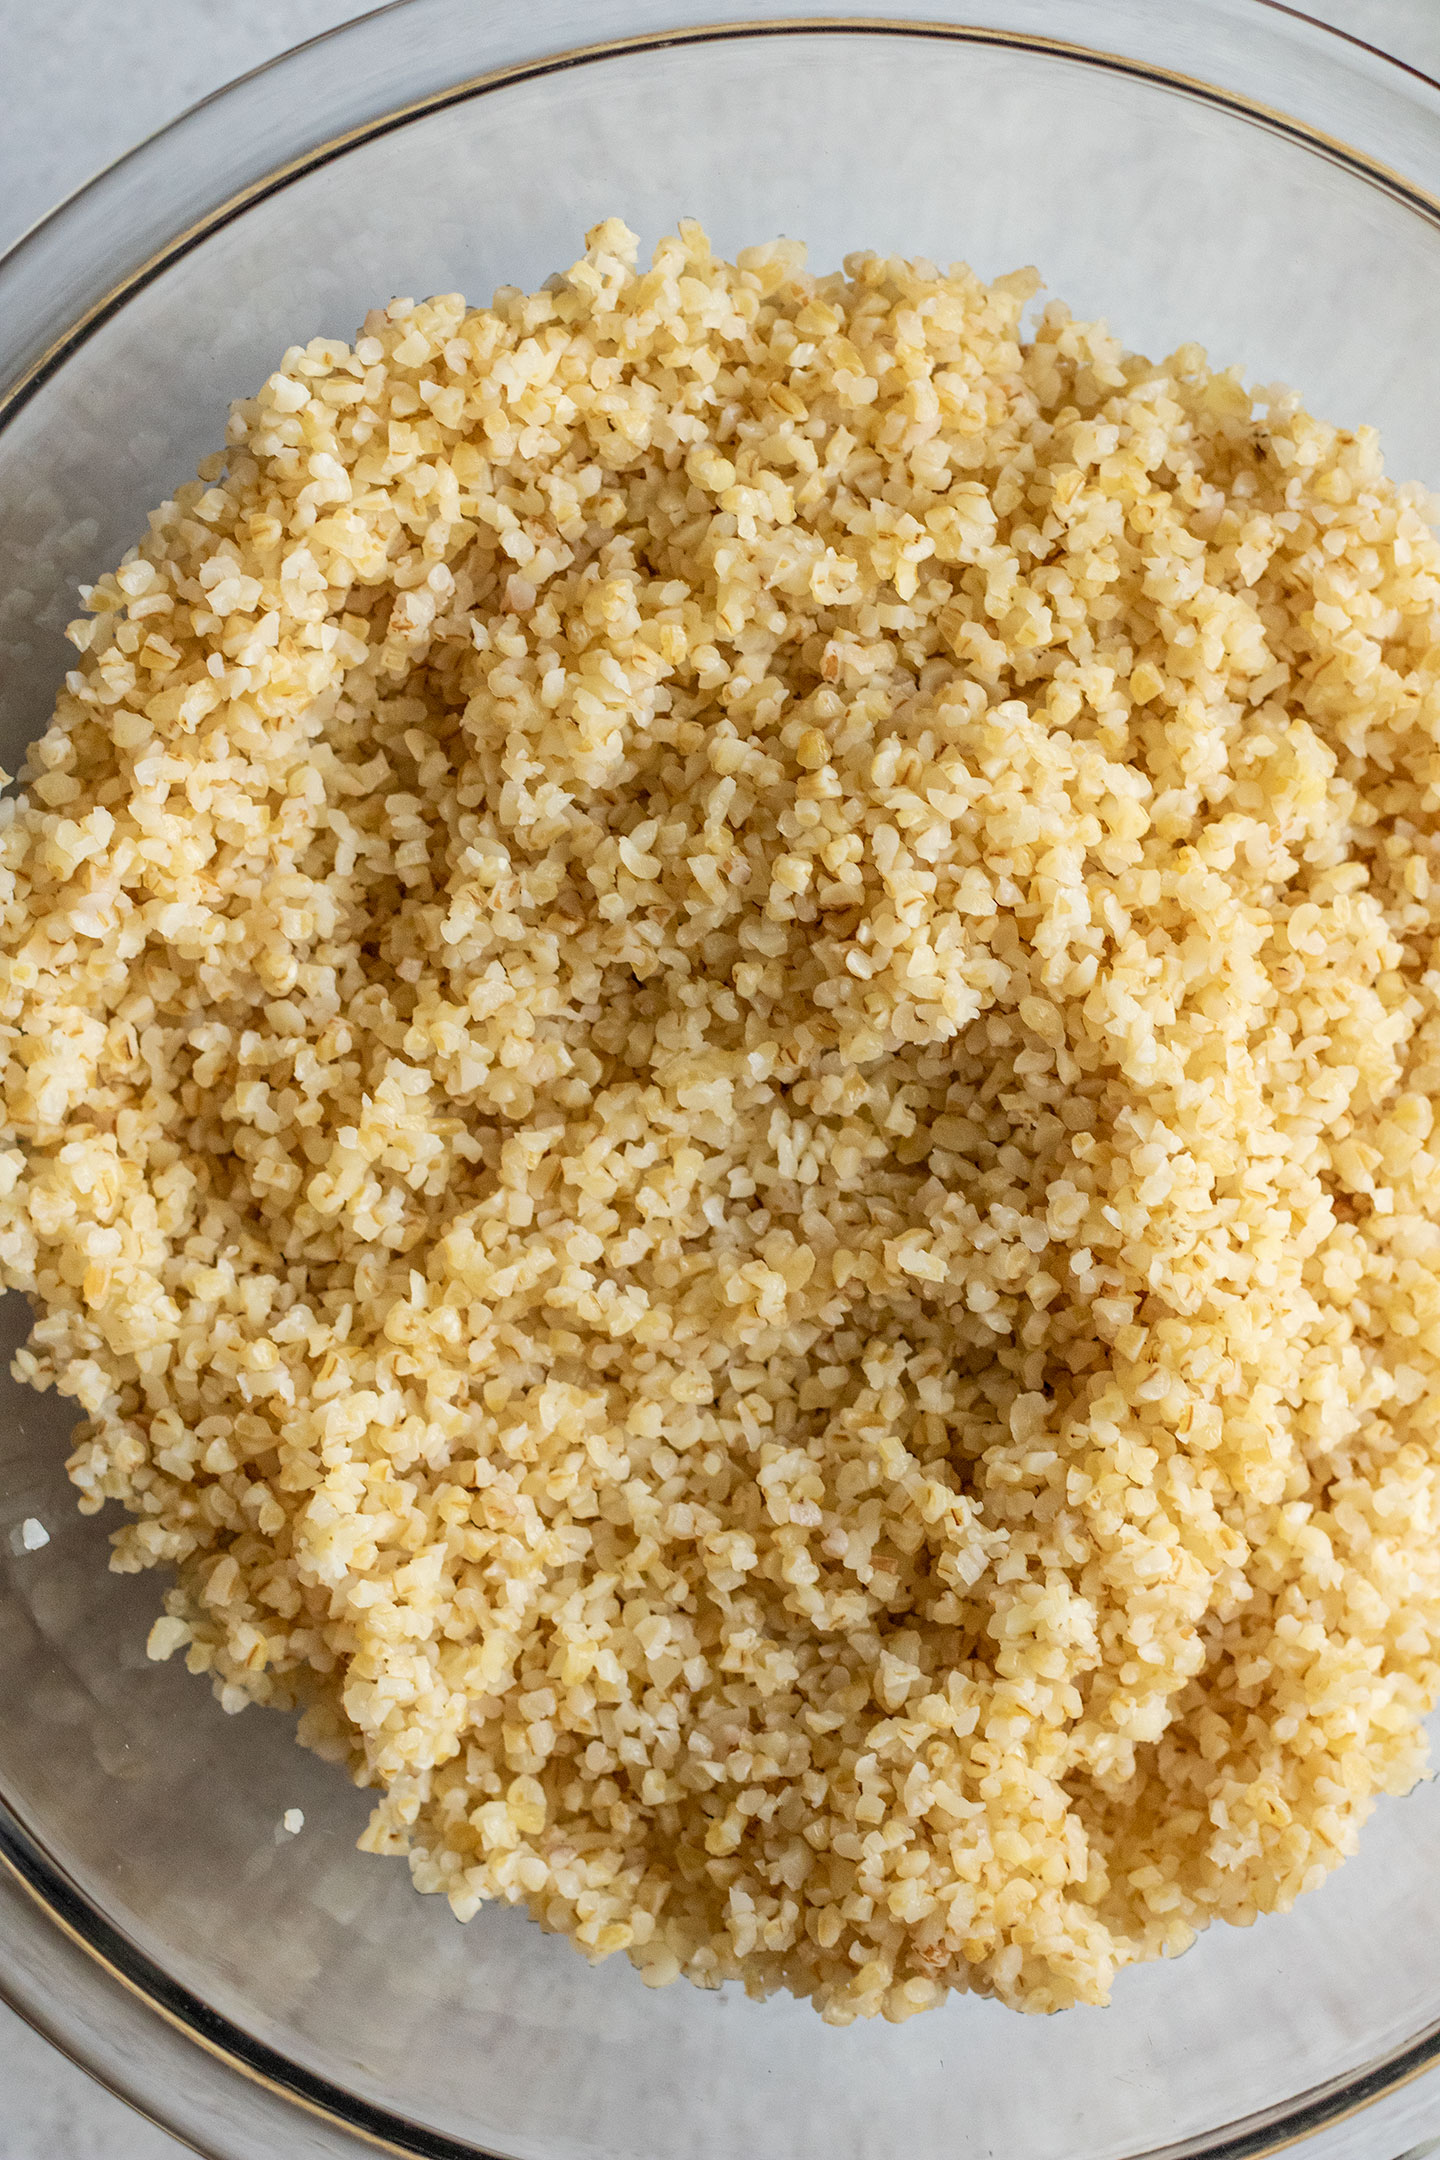 Soaked bulgur after being drained and placed in a glass bowl.